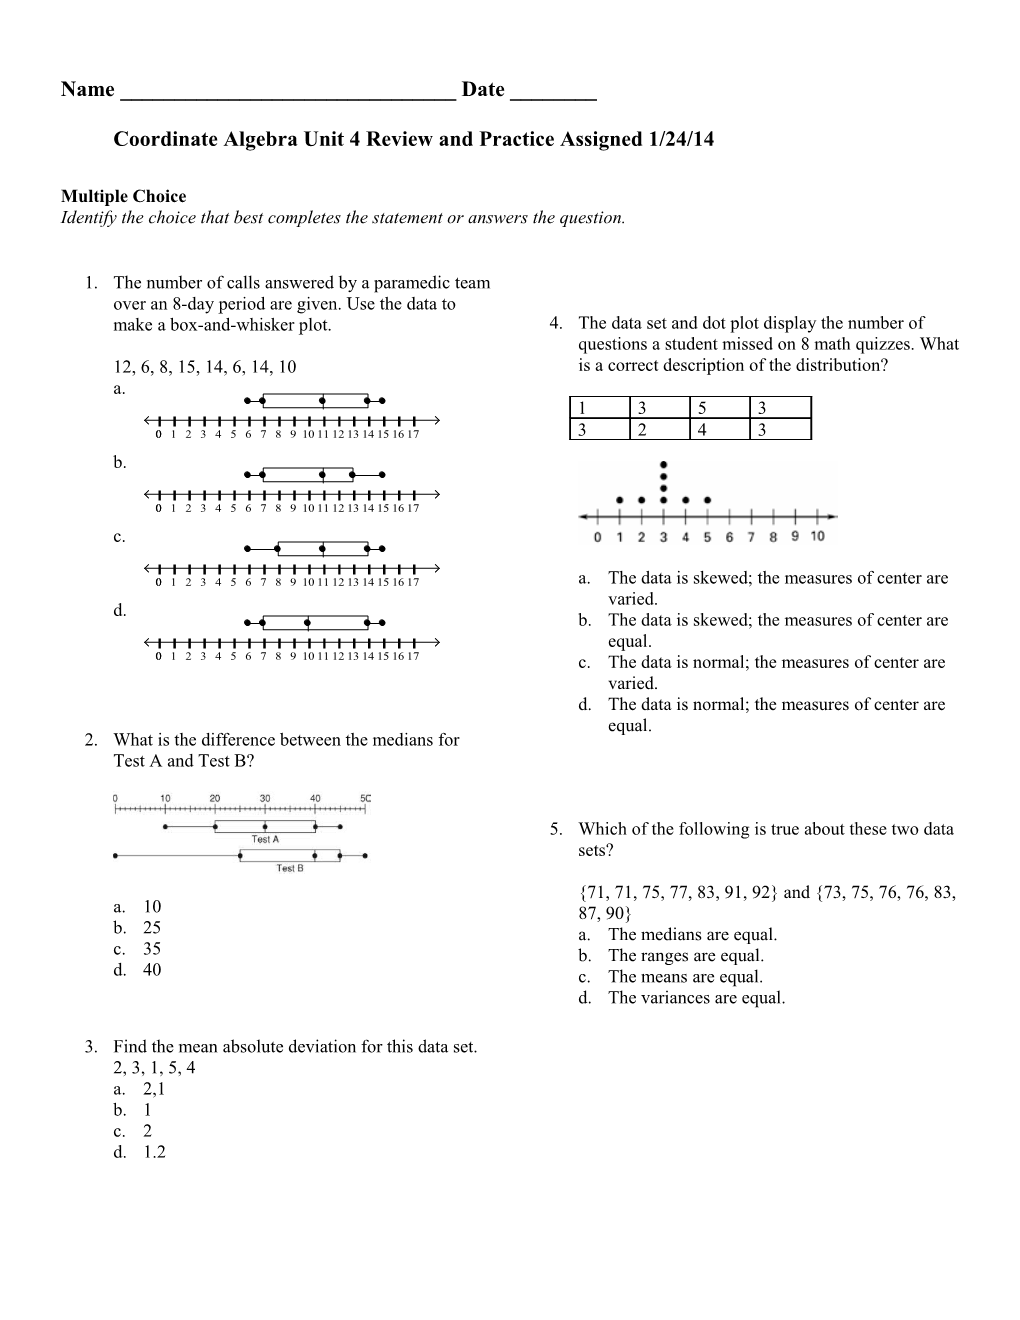 Coordinate Algebra Unit 4 Review and Practice Assigned 1/24/14